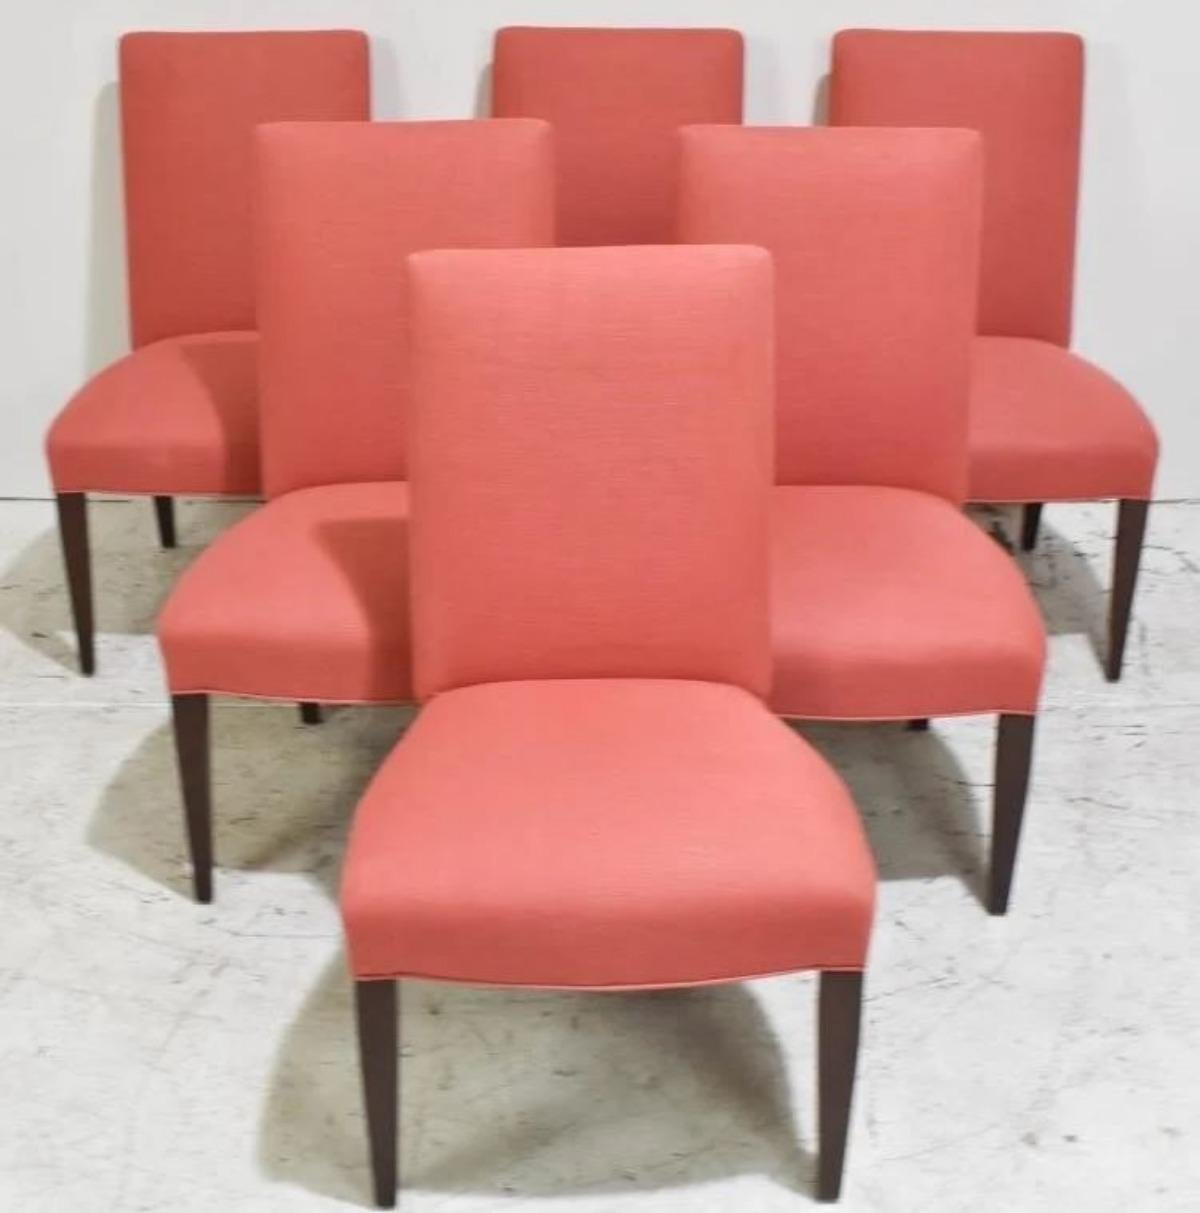 A stunning suite of six original L Classic dining chairs with original upholstery.
These are a very high end, well made suite of dining chairs, the American mahogany legs have a sublime patina, and beautifully upholstered.
 